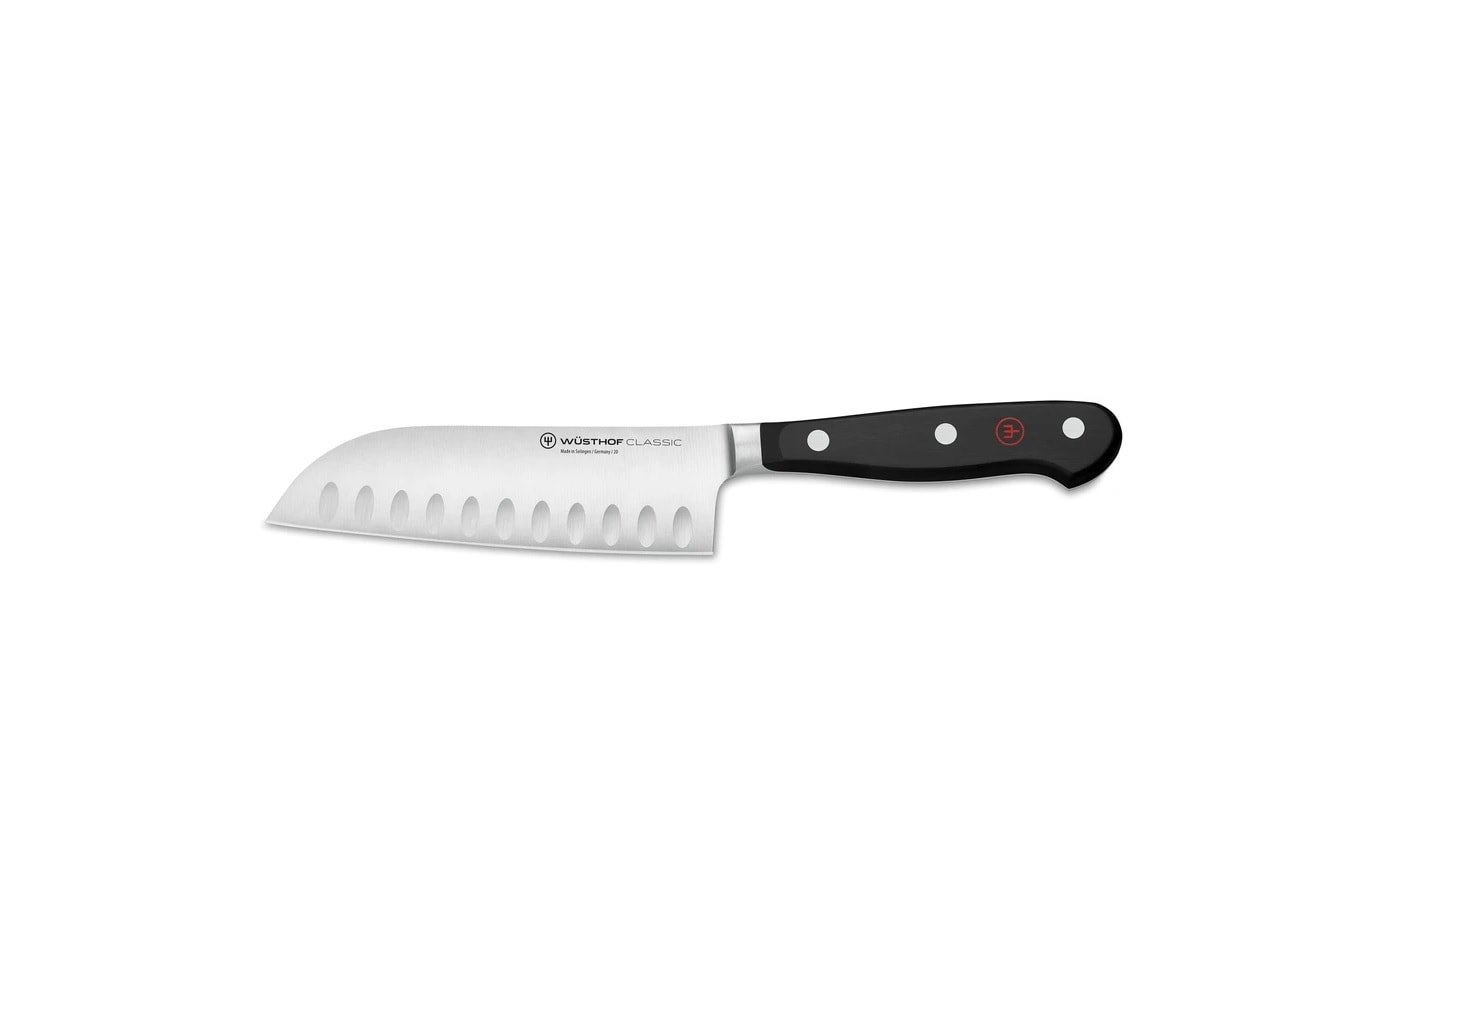 08 - AUTHENTIC: 10 Chef's Knife